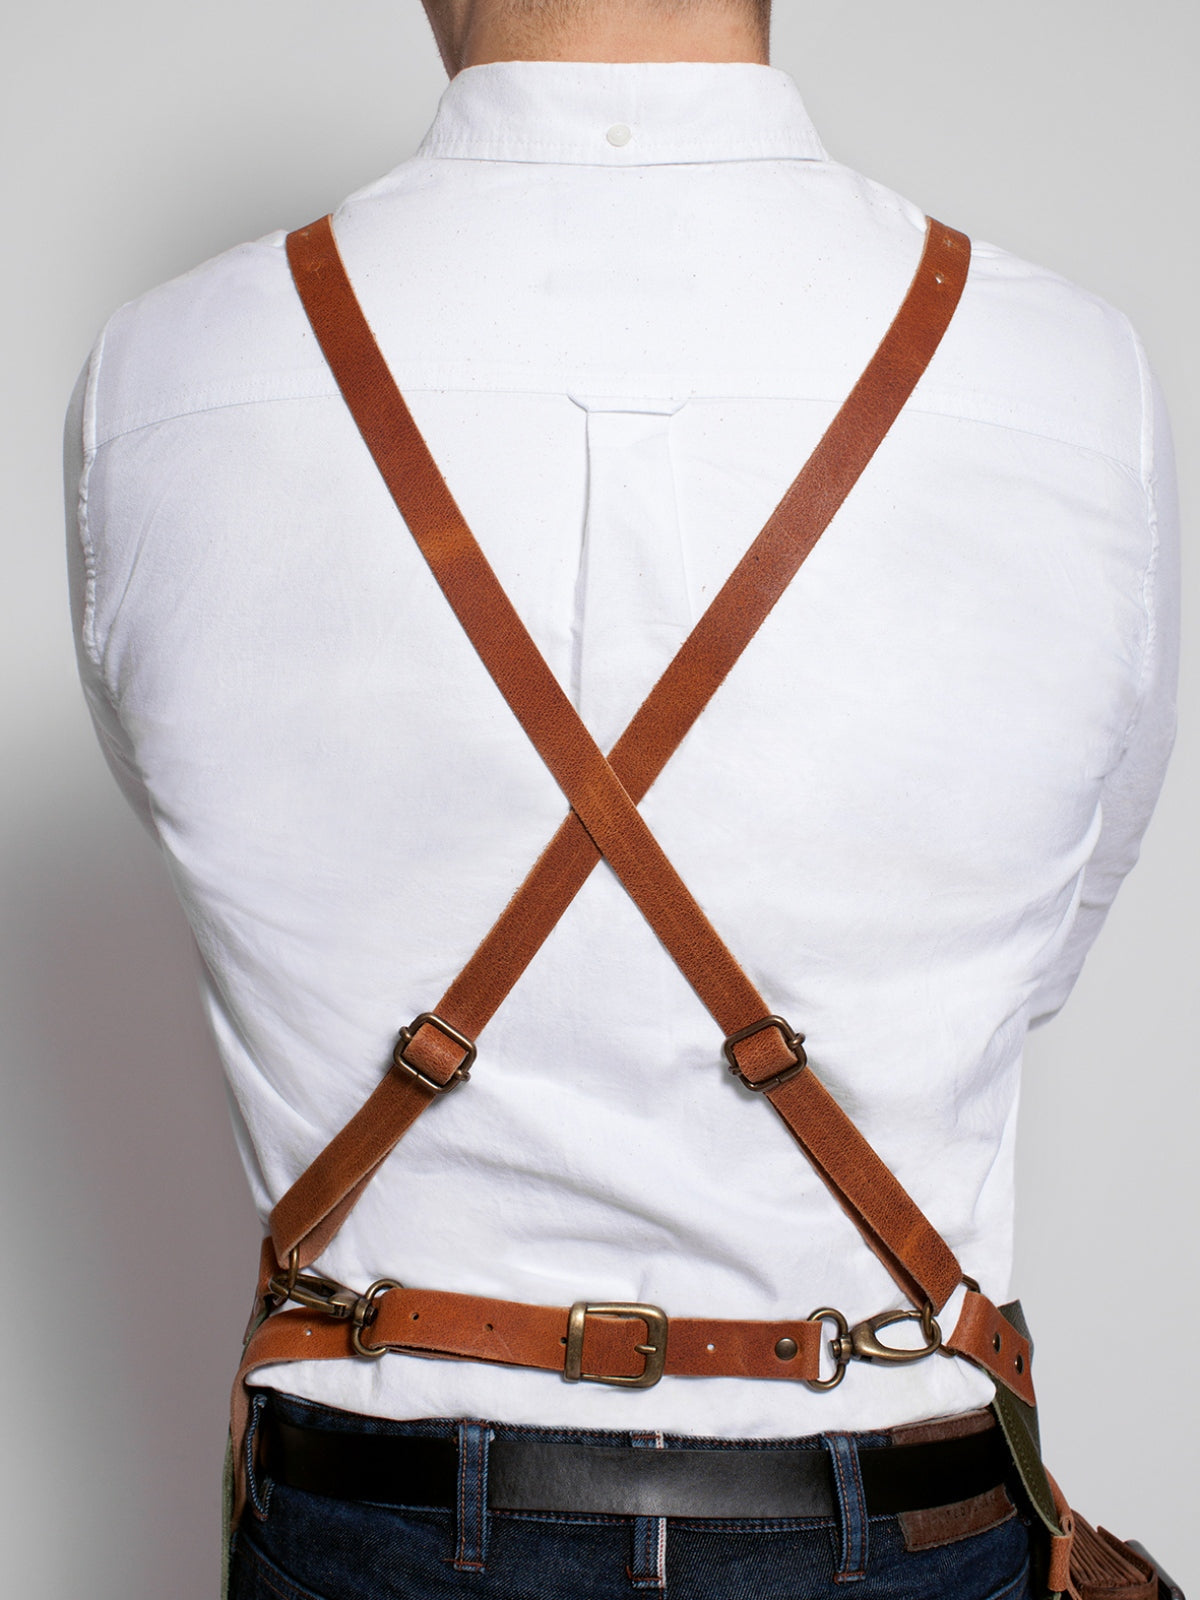 Leather Apron Cross Strap Deluxe Black by STW -  ChefsCotton